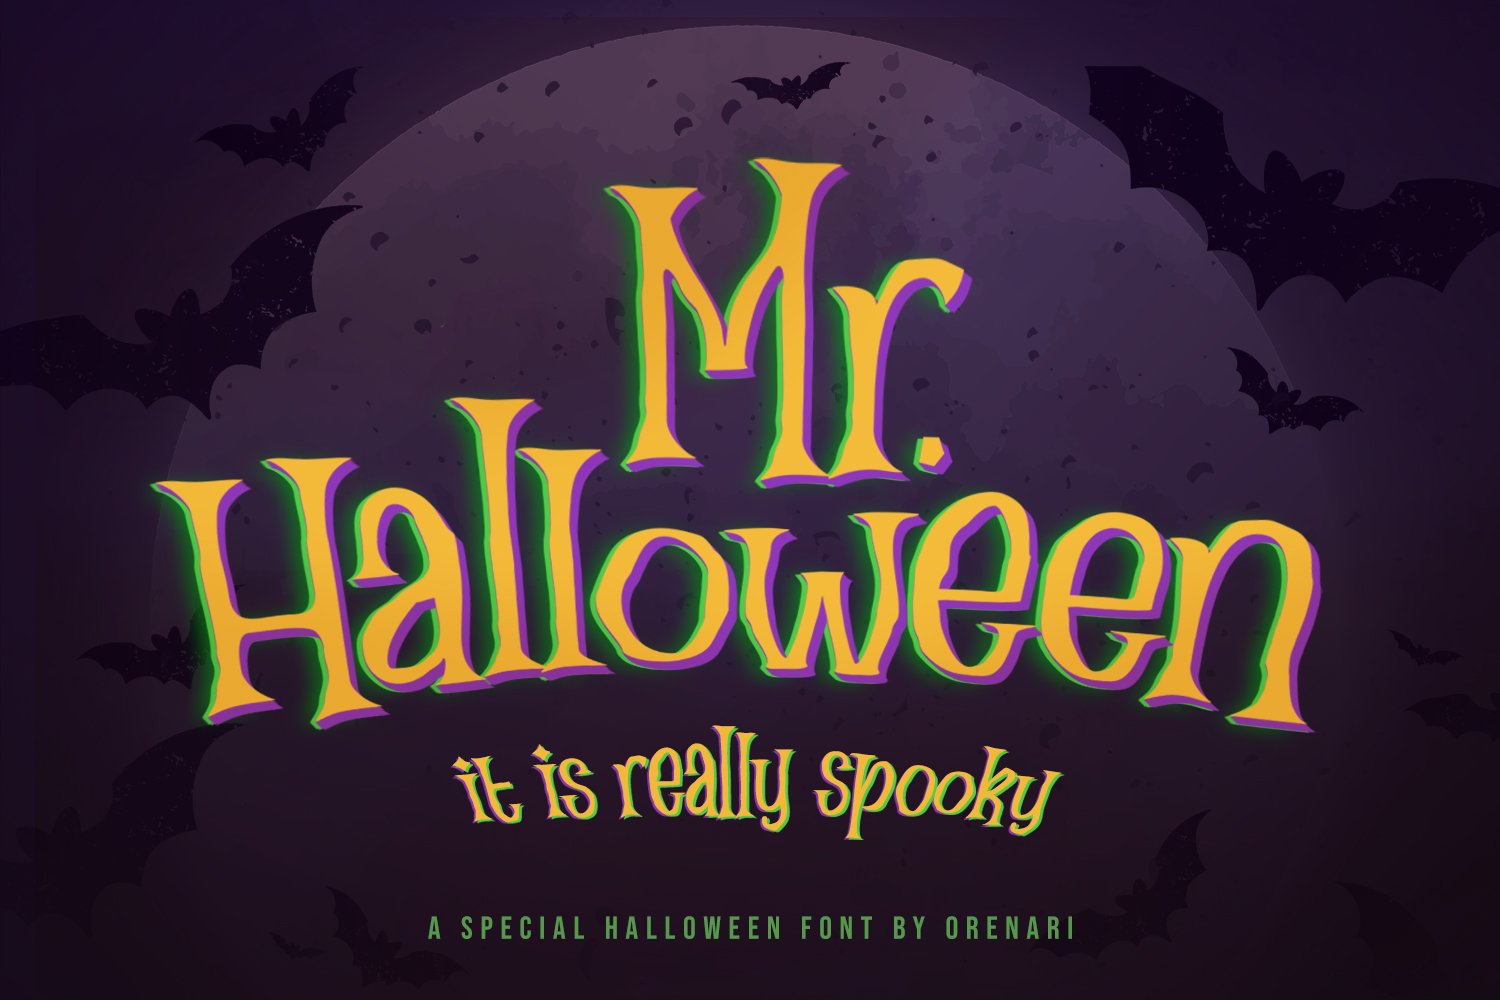 Mr. Halloween Font cover image.